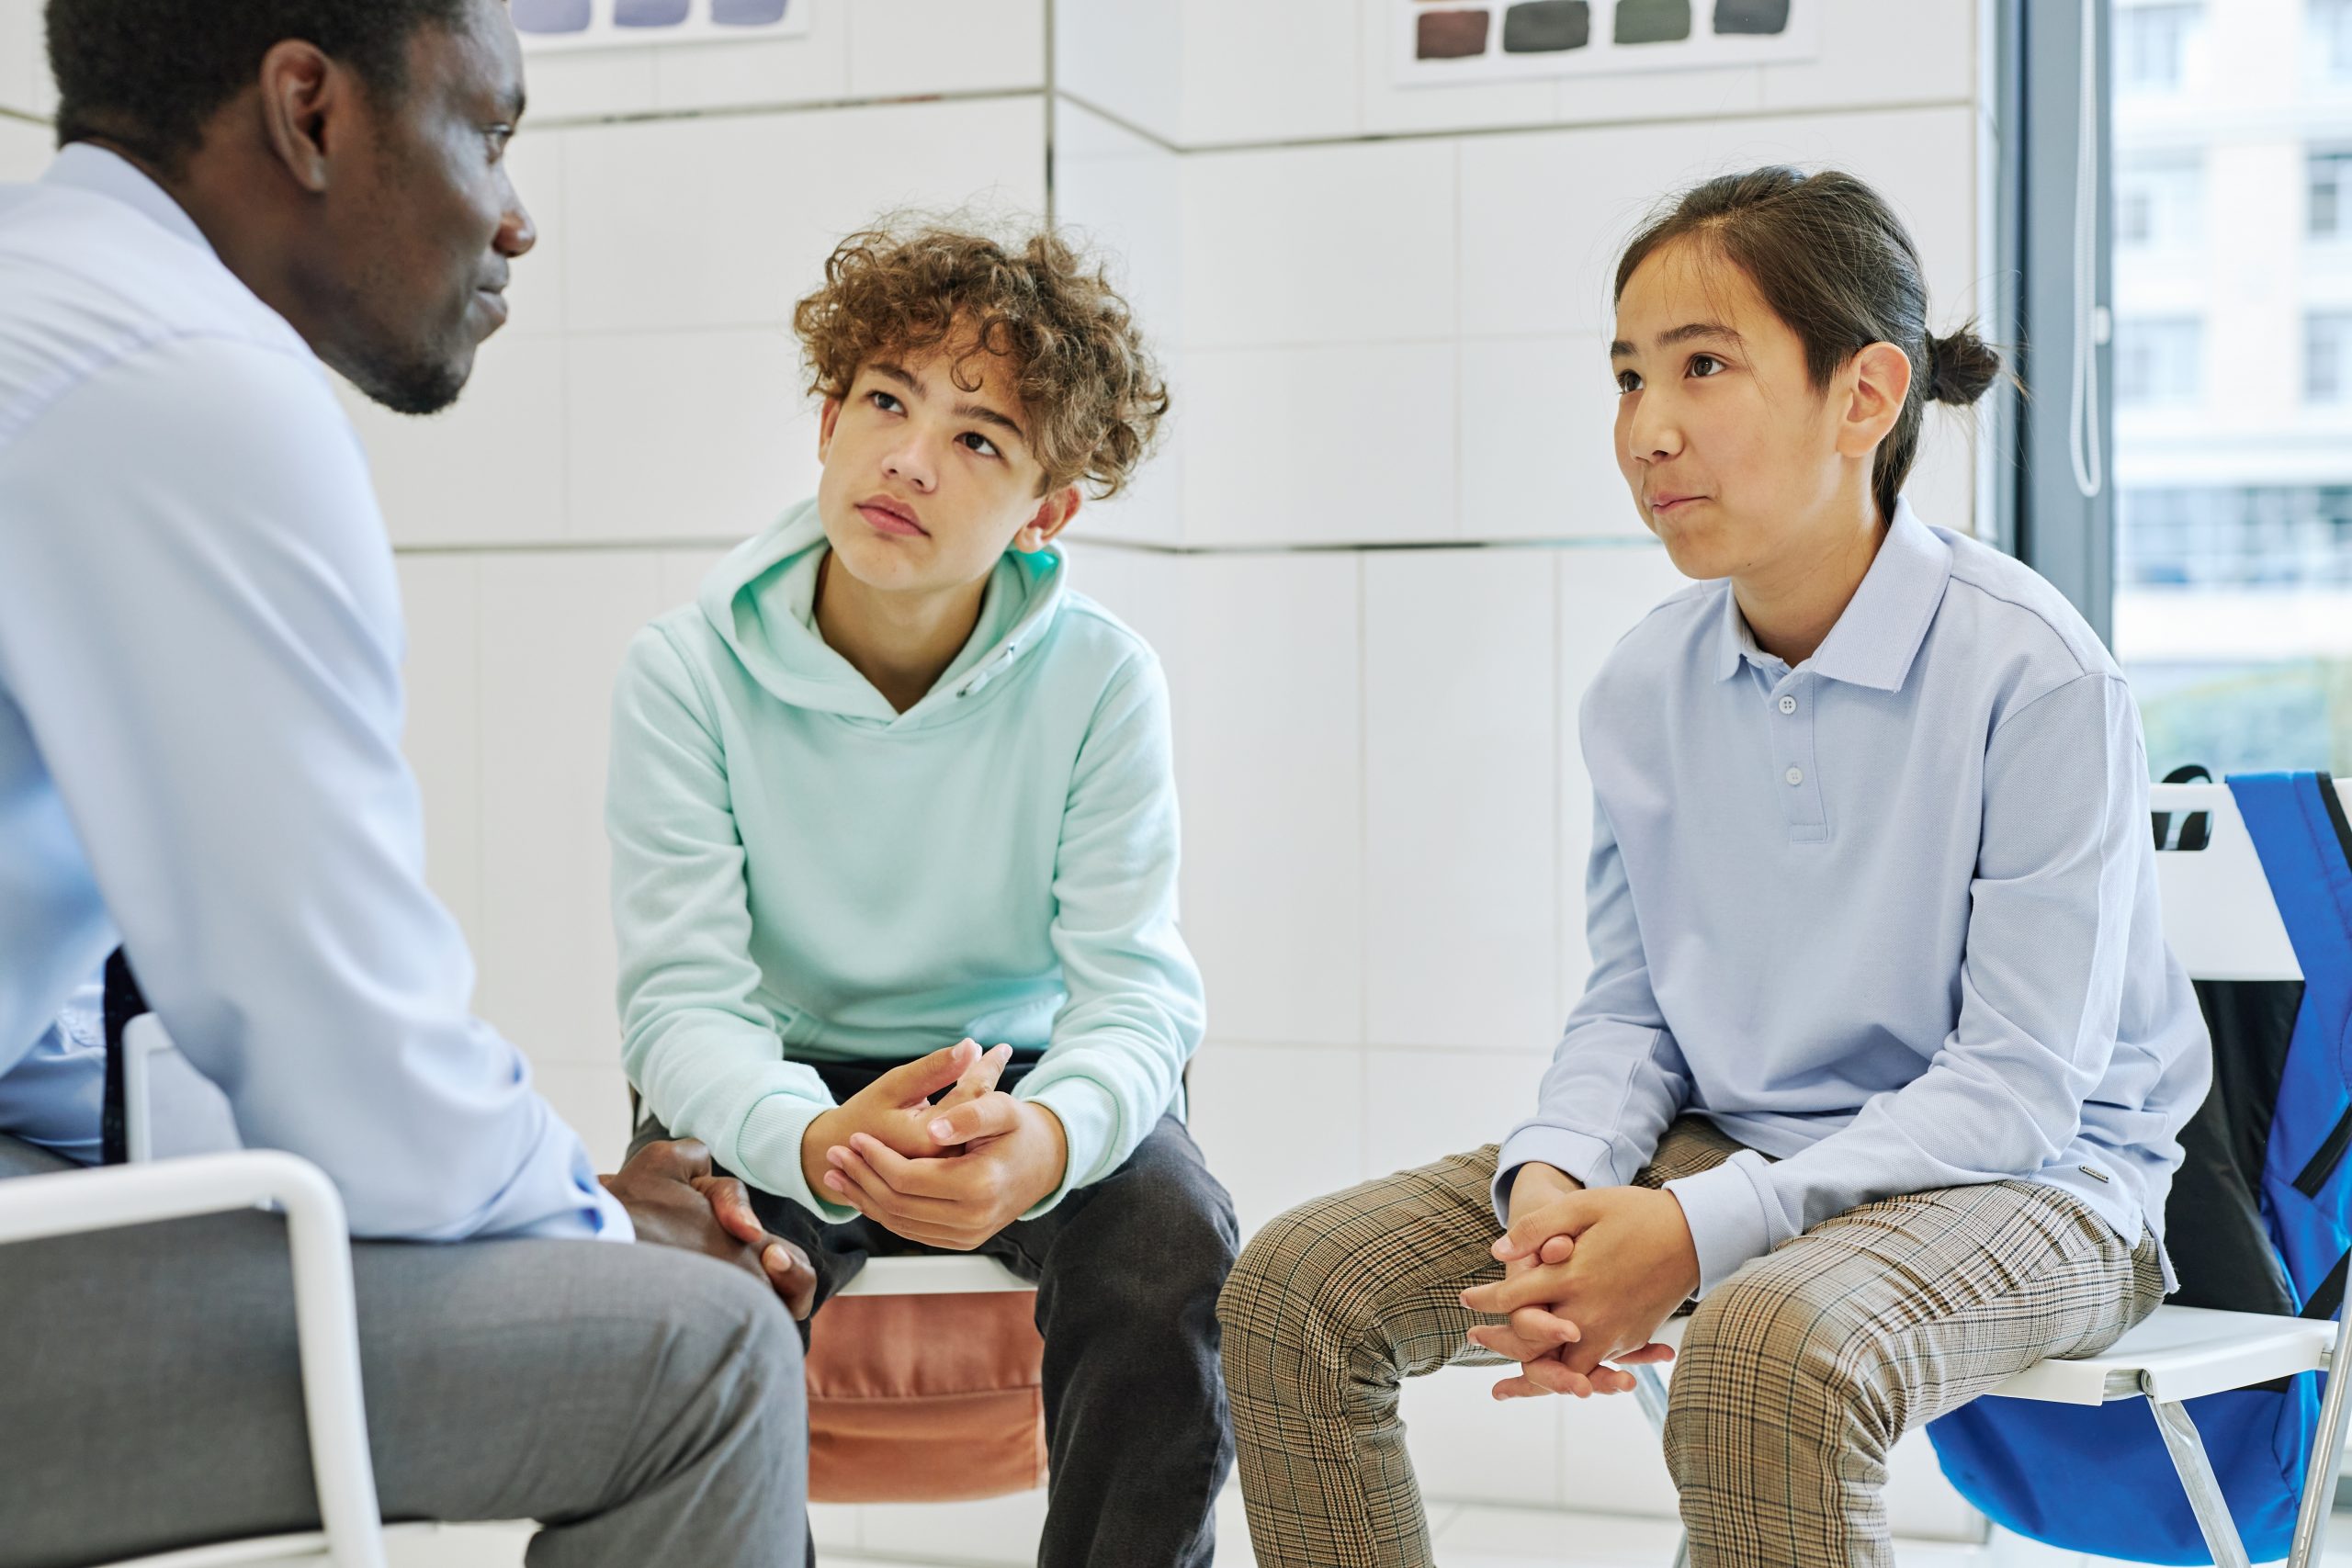 What Are the Benefits of Outpatient Mental Health Treatment For Children?